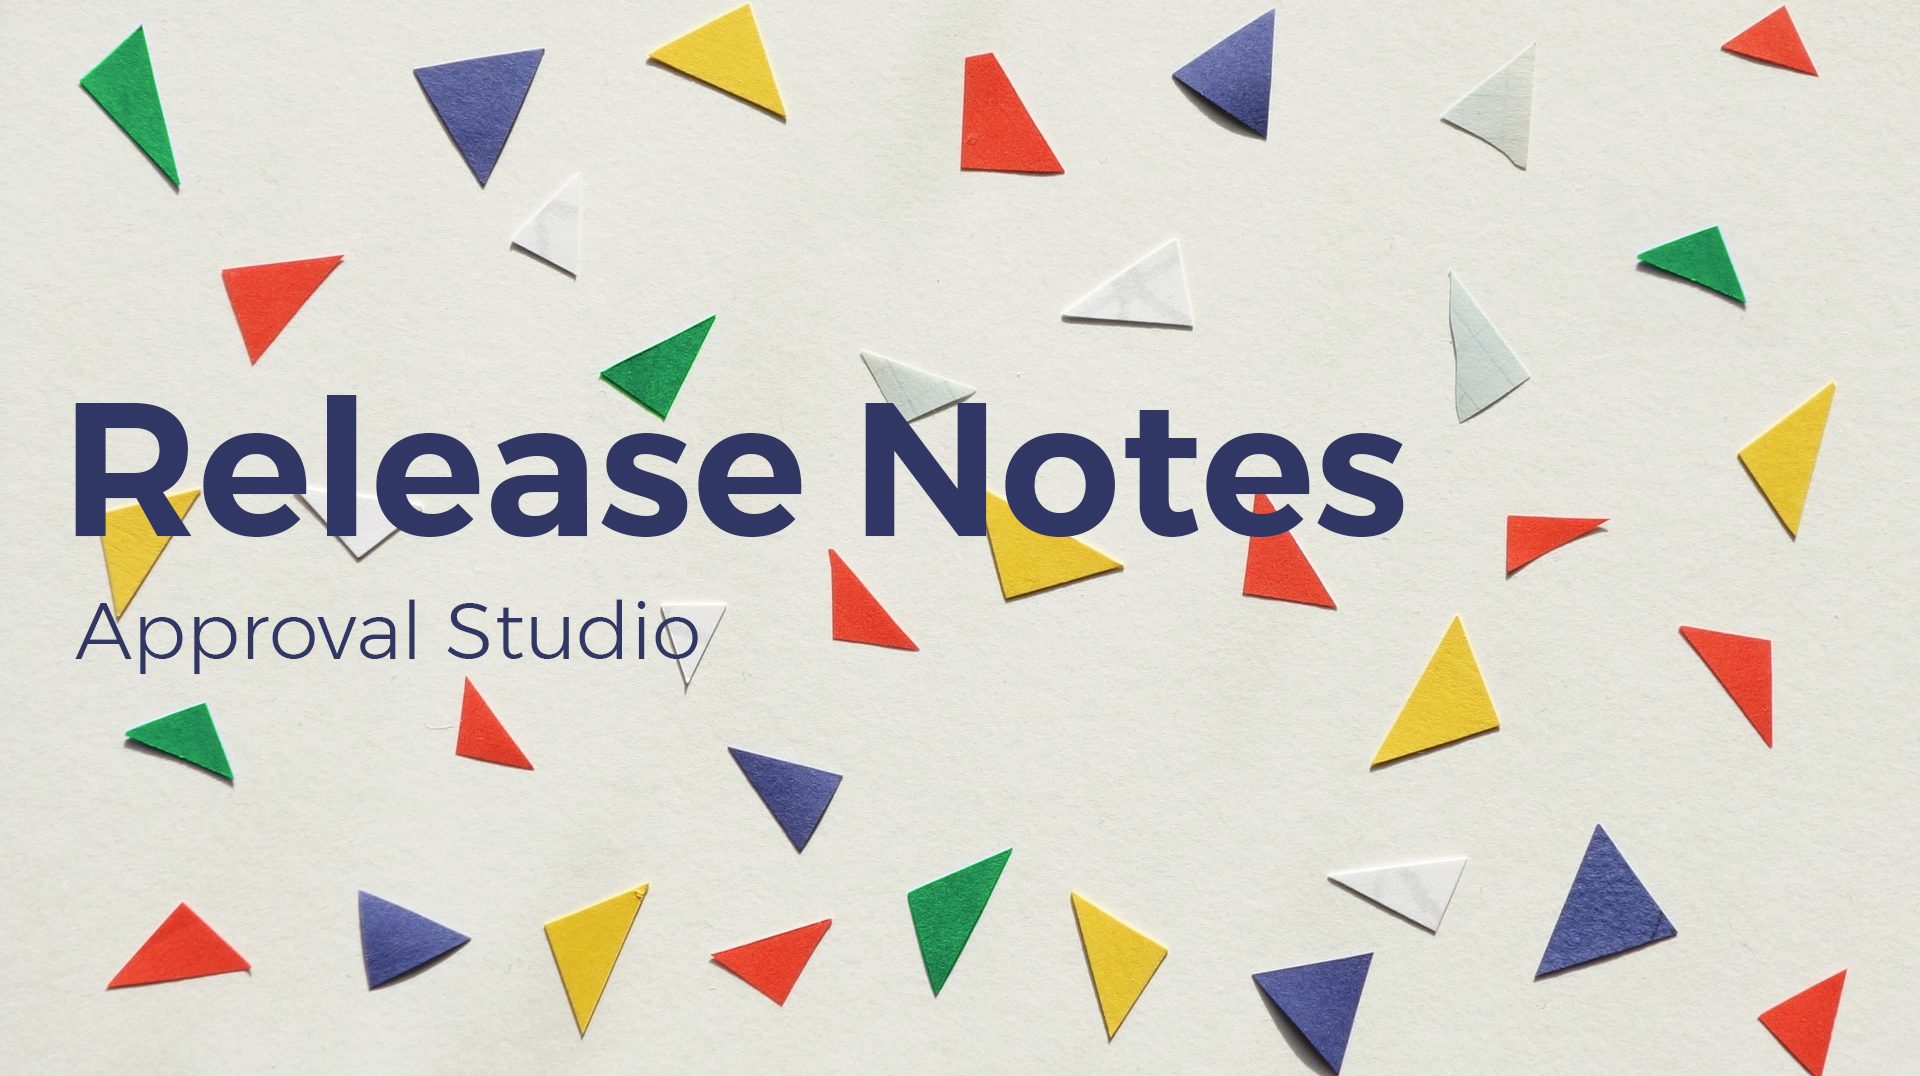 Release Notes Approval Studio